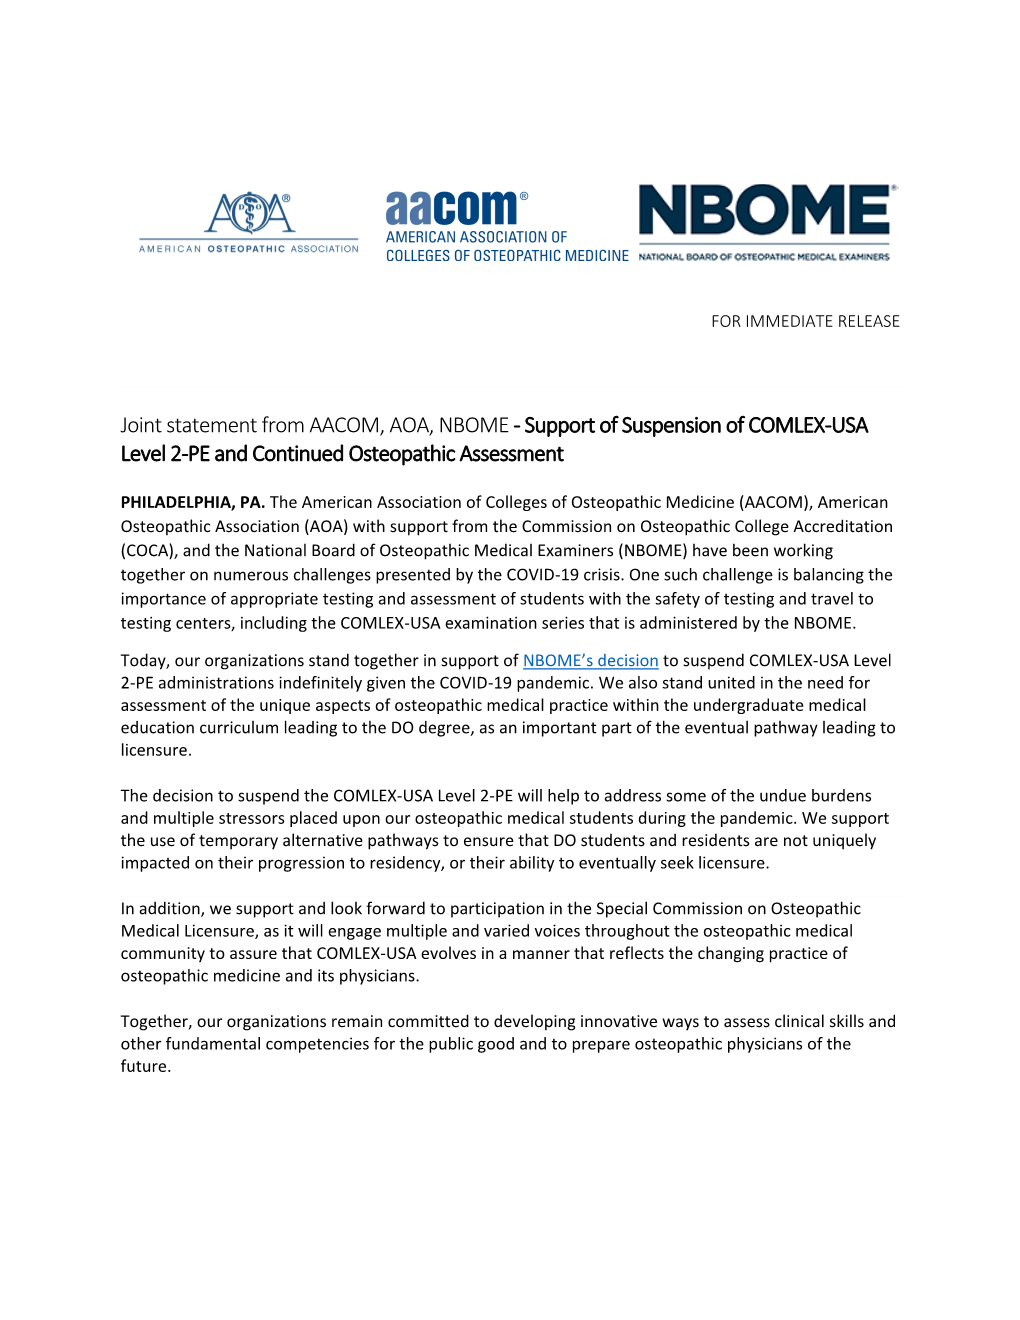 Joint Statement from AACOM, AOA, NBOME - Support of Suspension of COMLEX-USA Level 2-PE and Continued Osteopathic Assessment